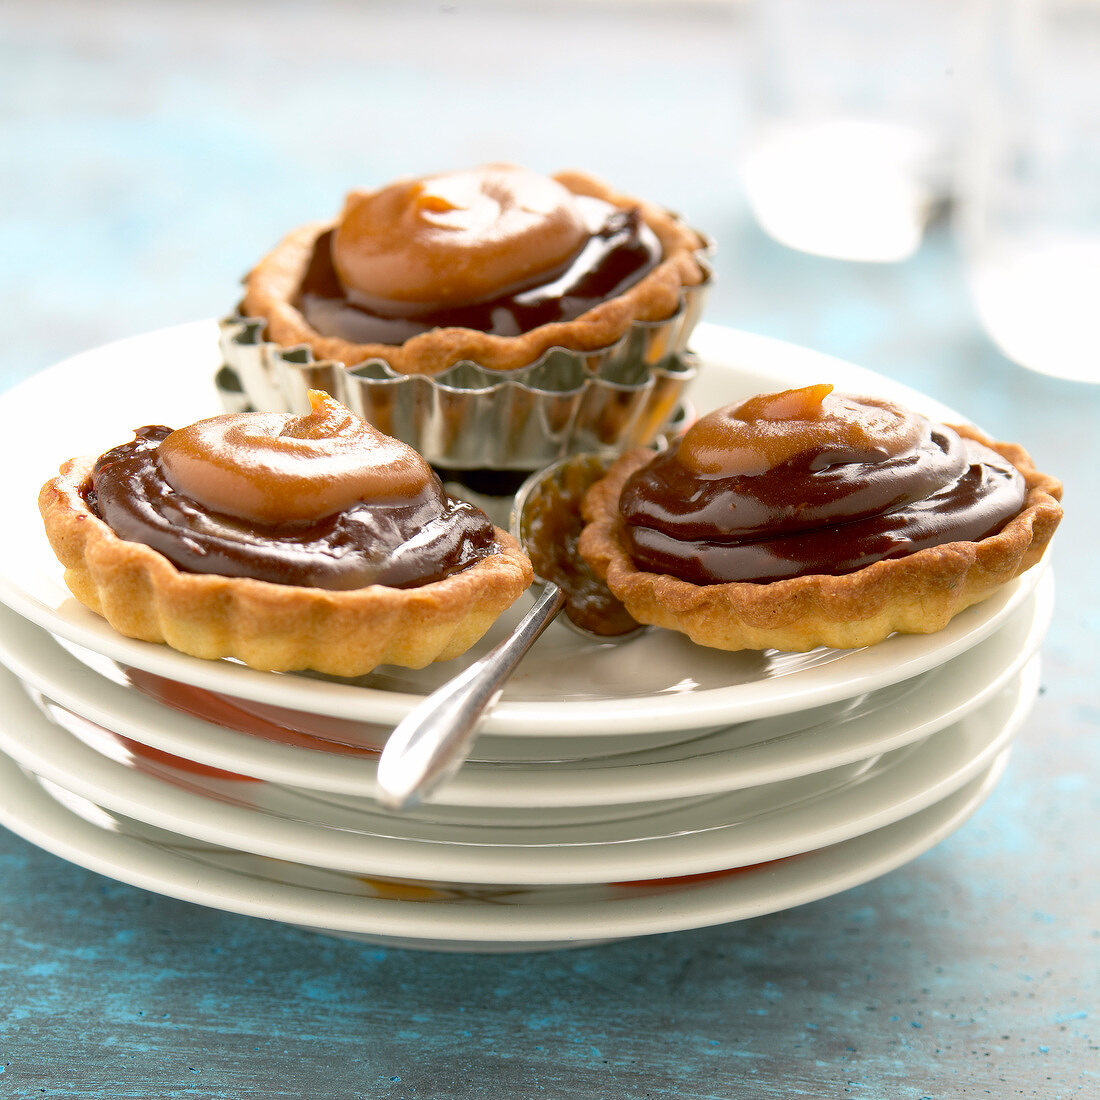 Chocolate and toffee tartlets